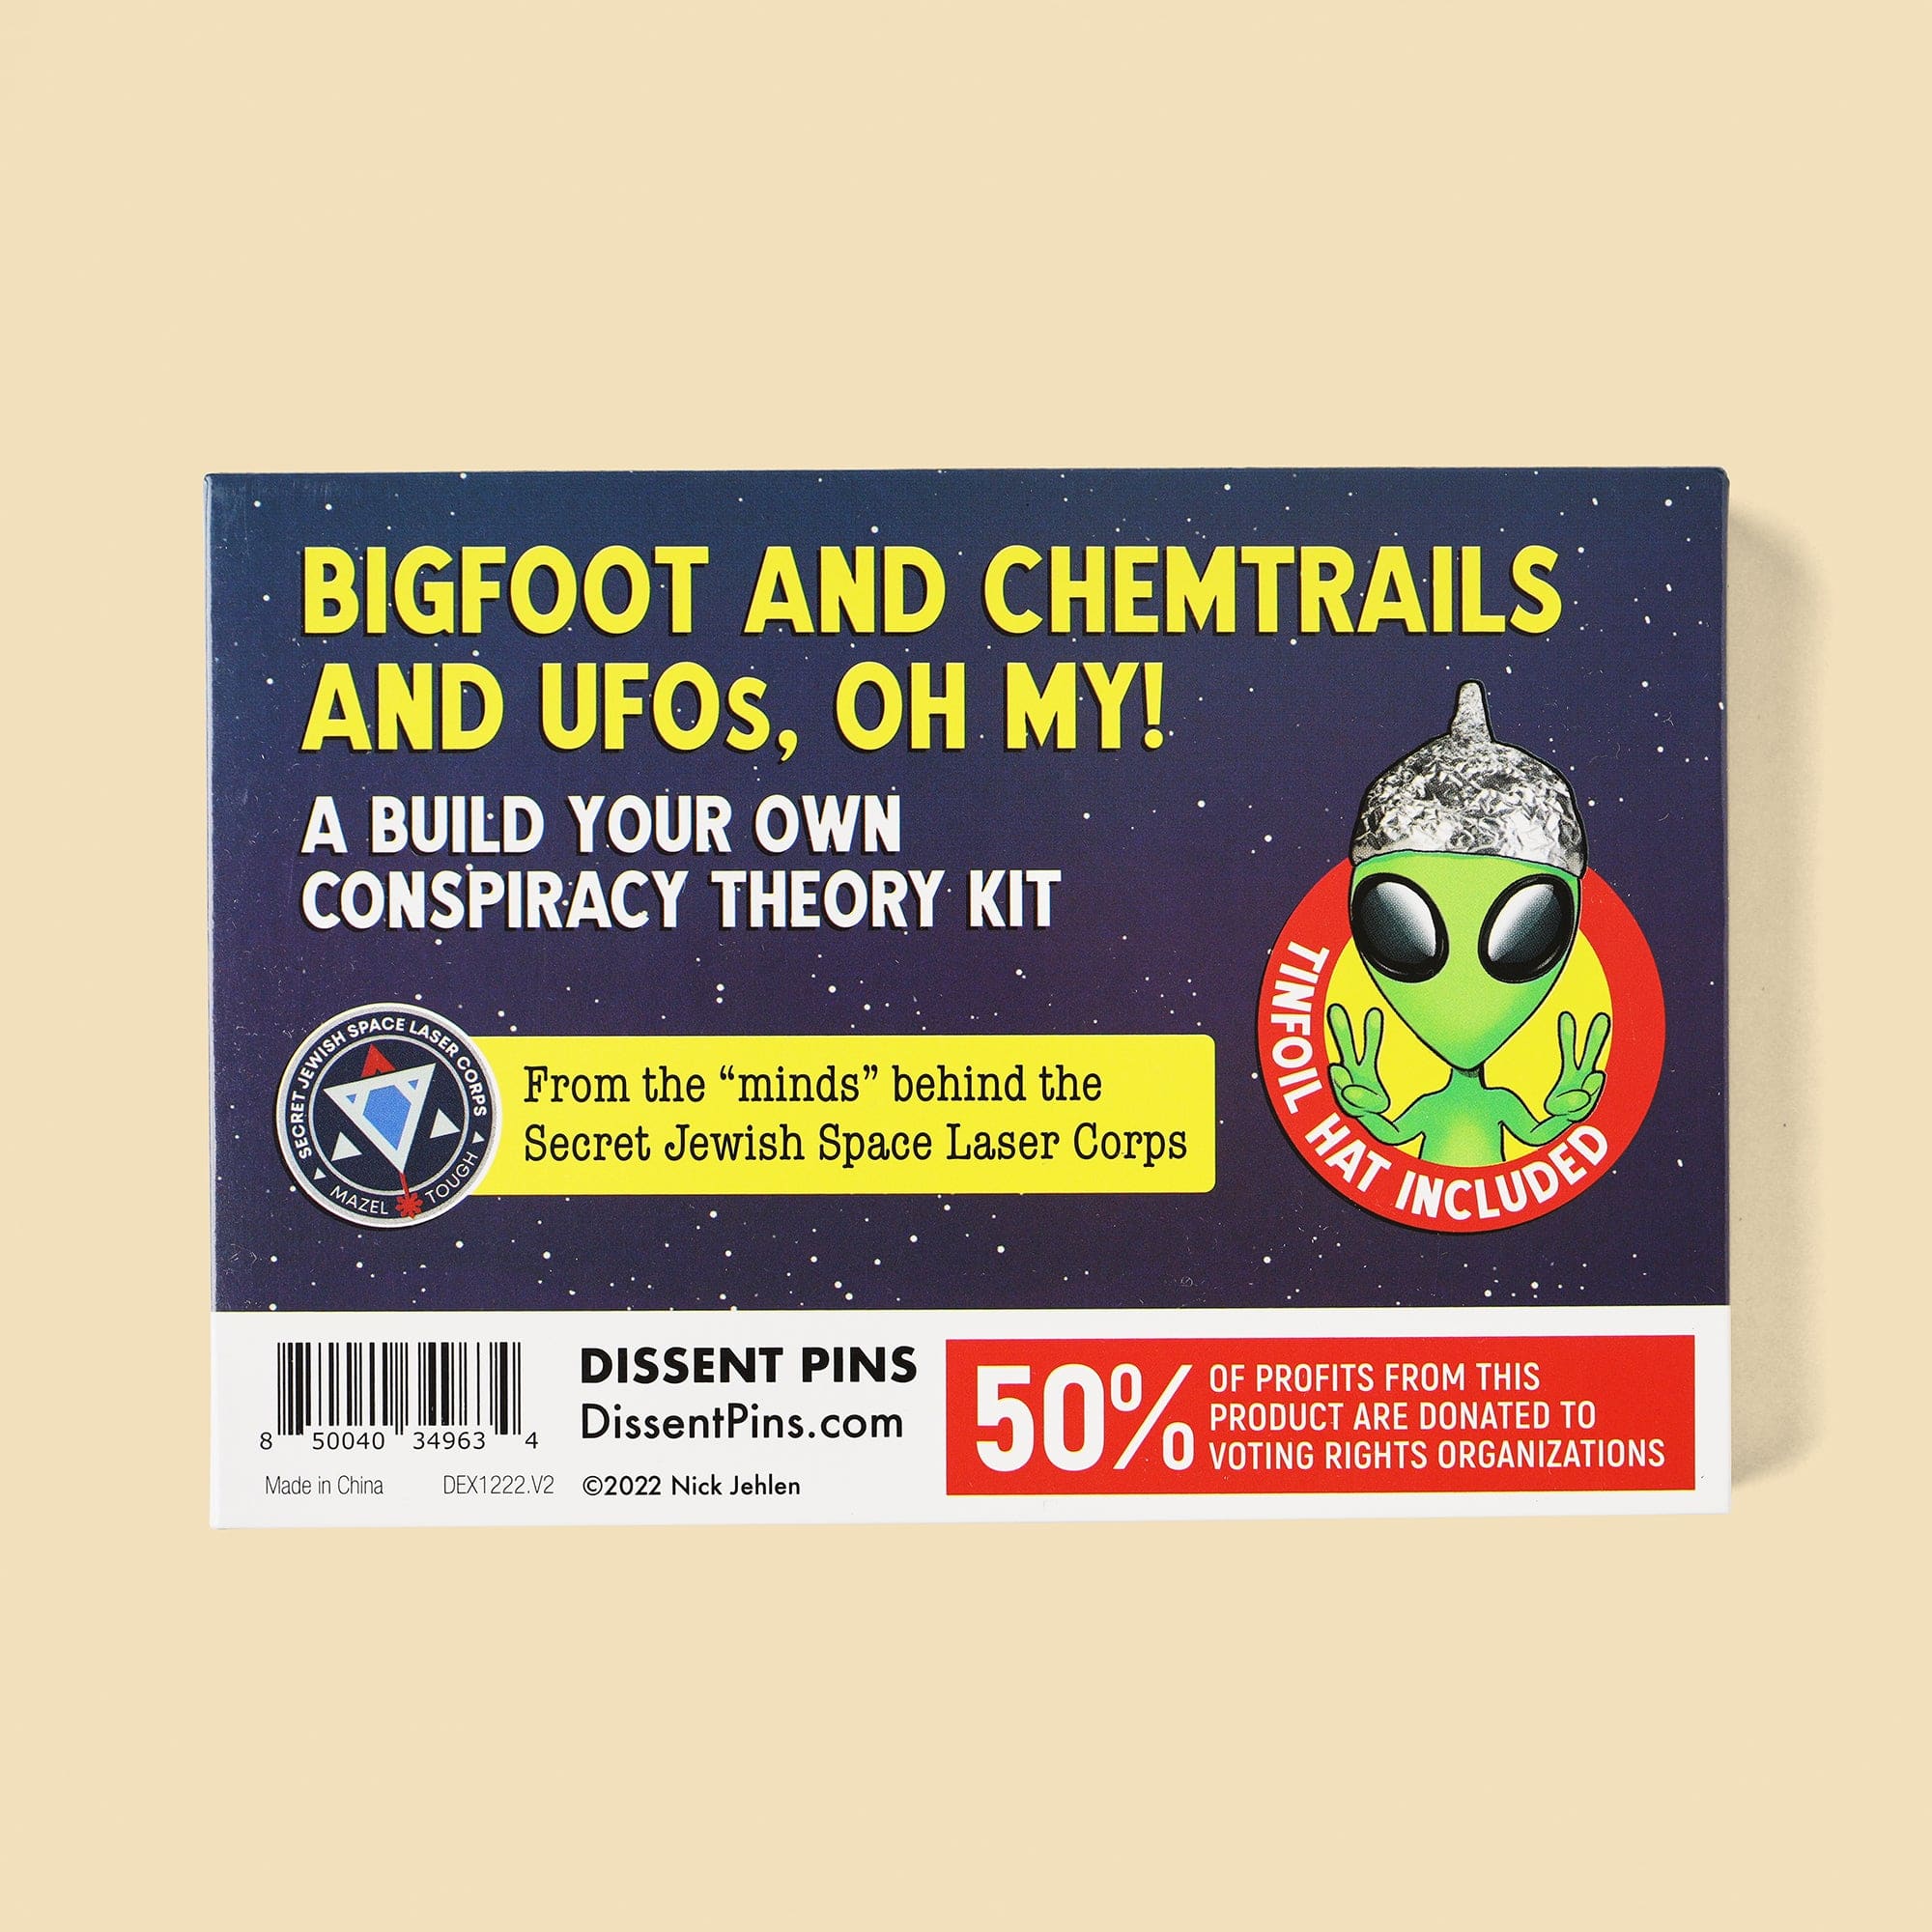 Bigfoot and Chemtrails and UFOs, Oh My! Conspiracy Theory Kit